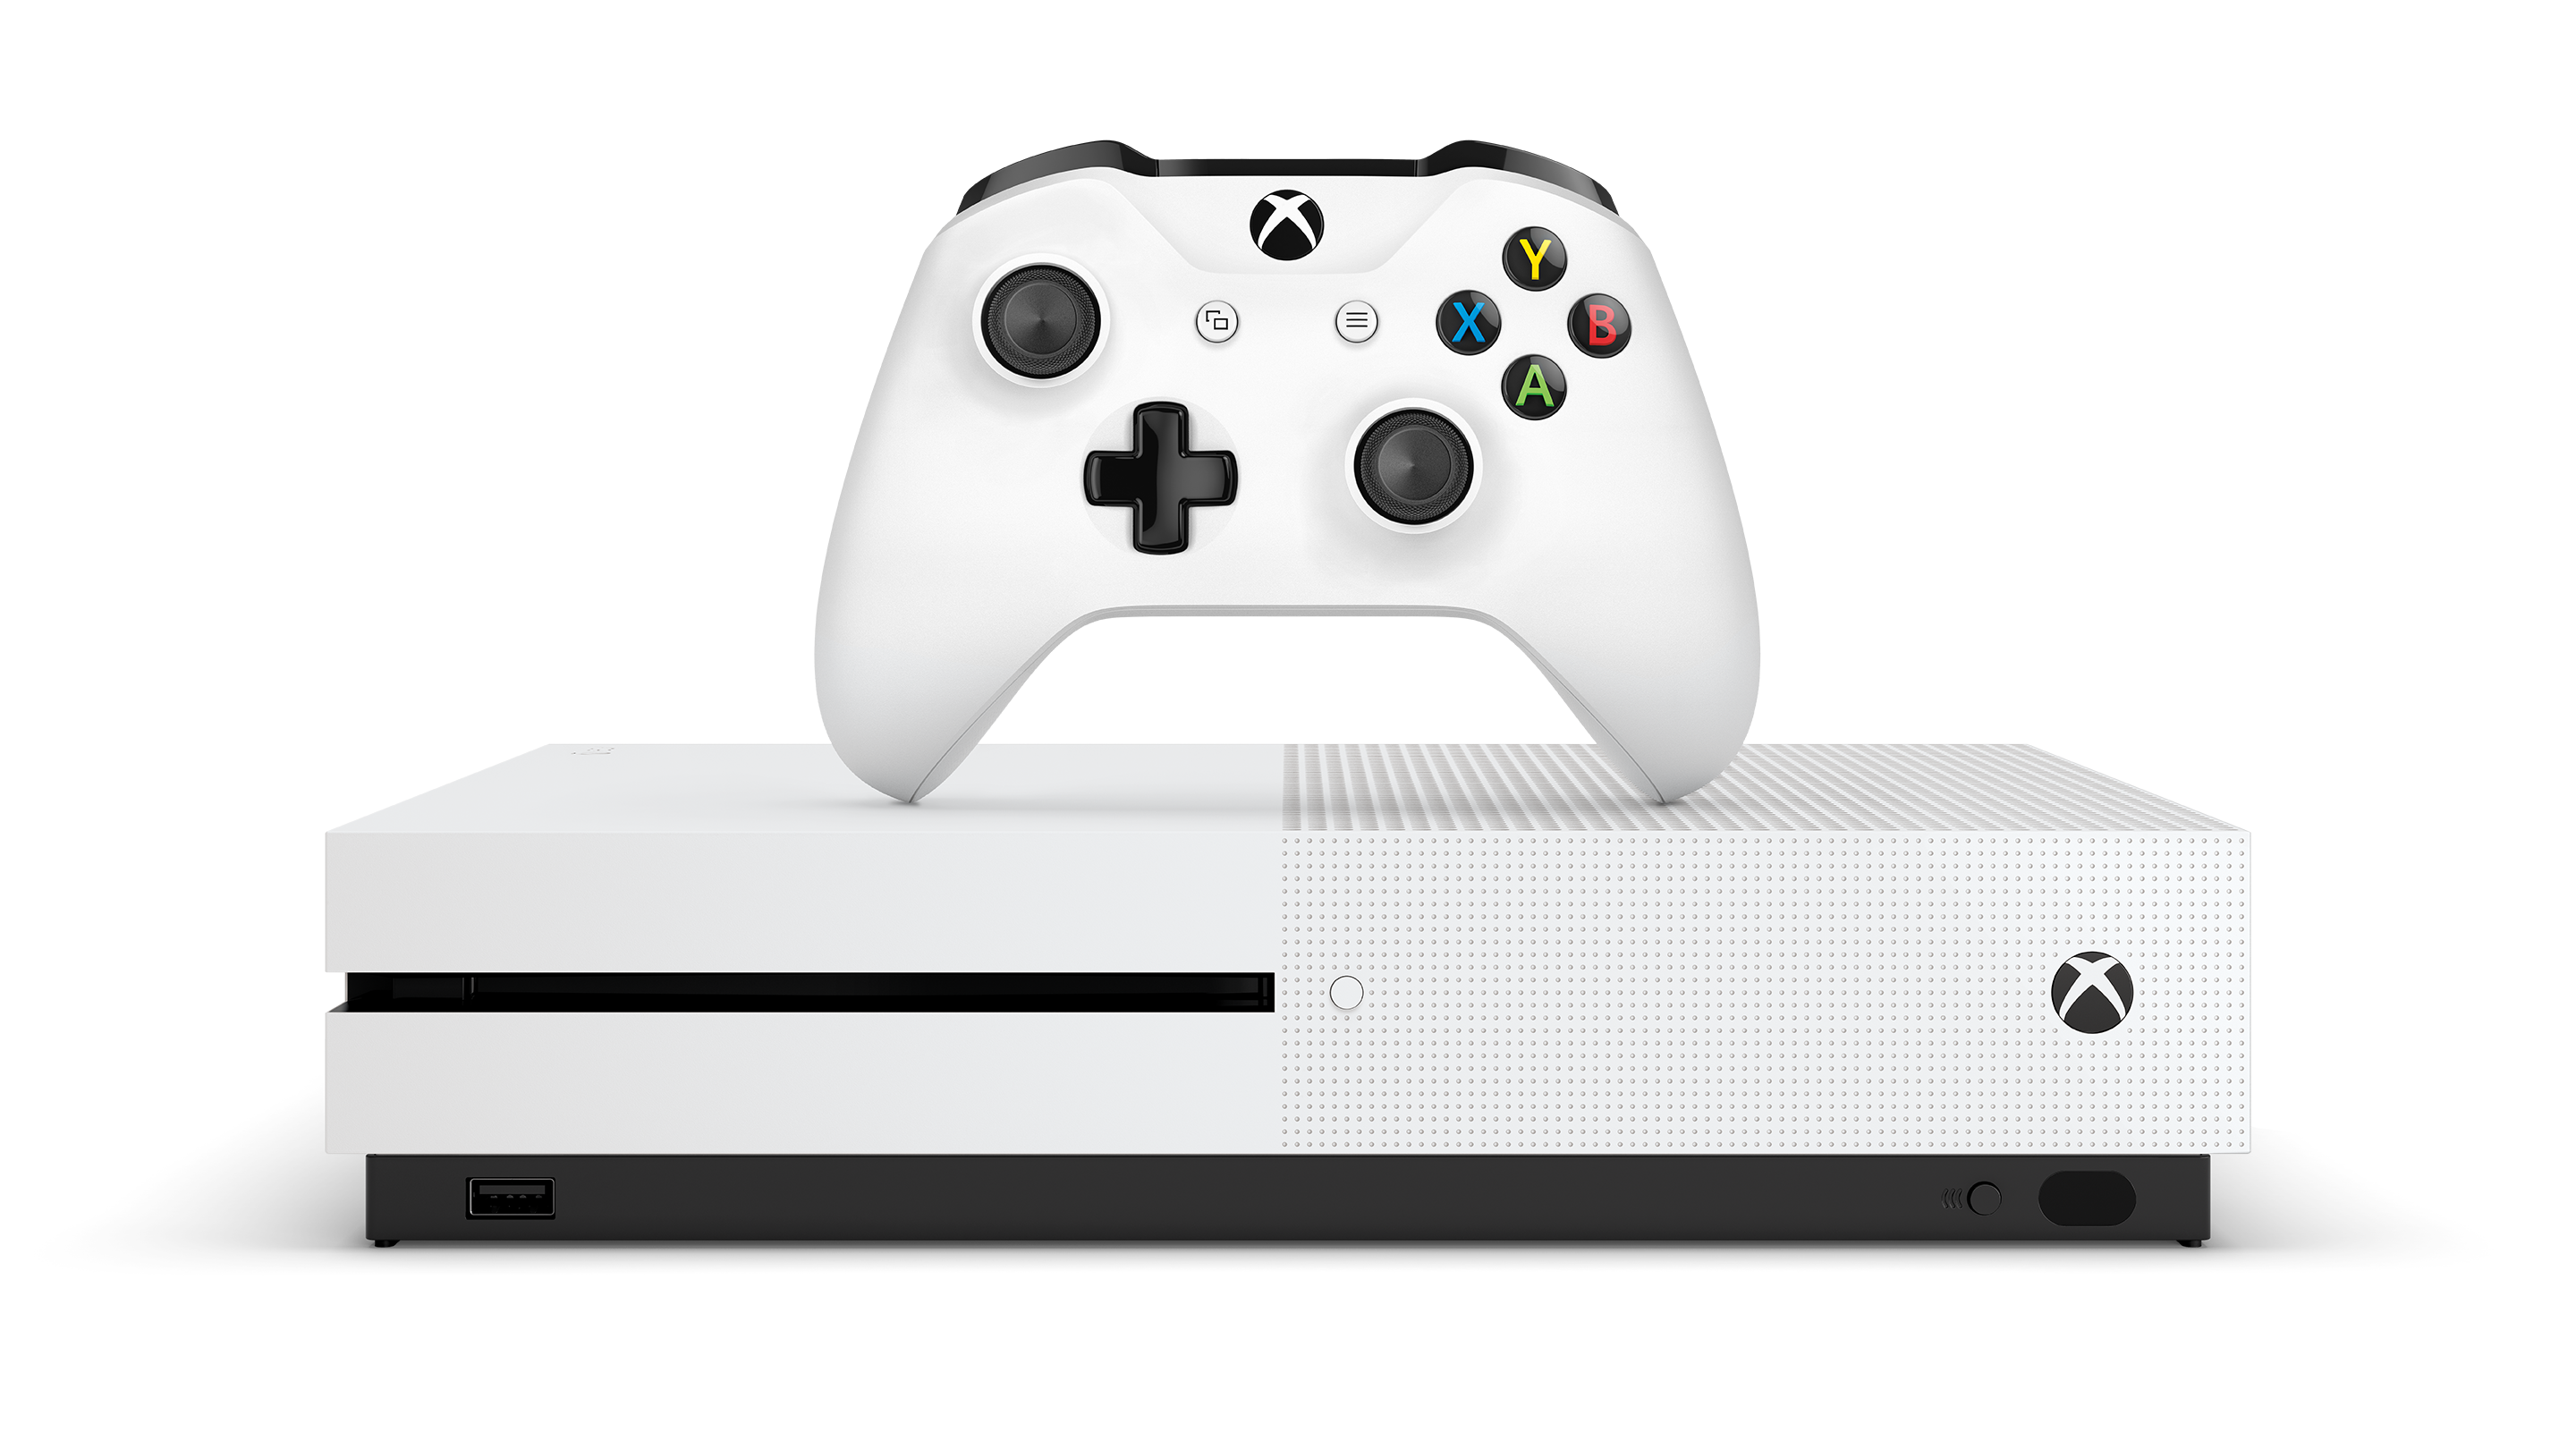 Xbox One S Product Shot